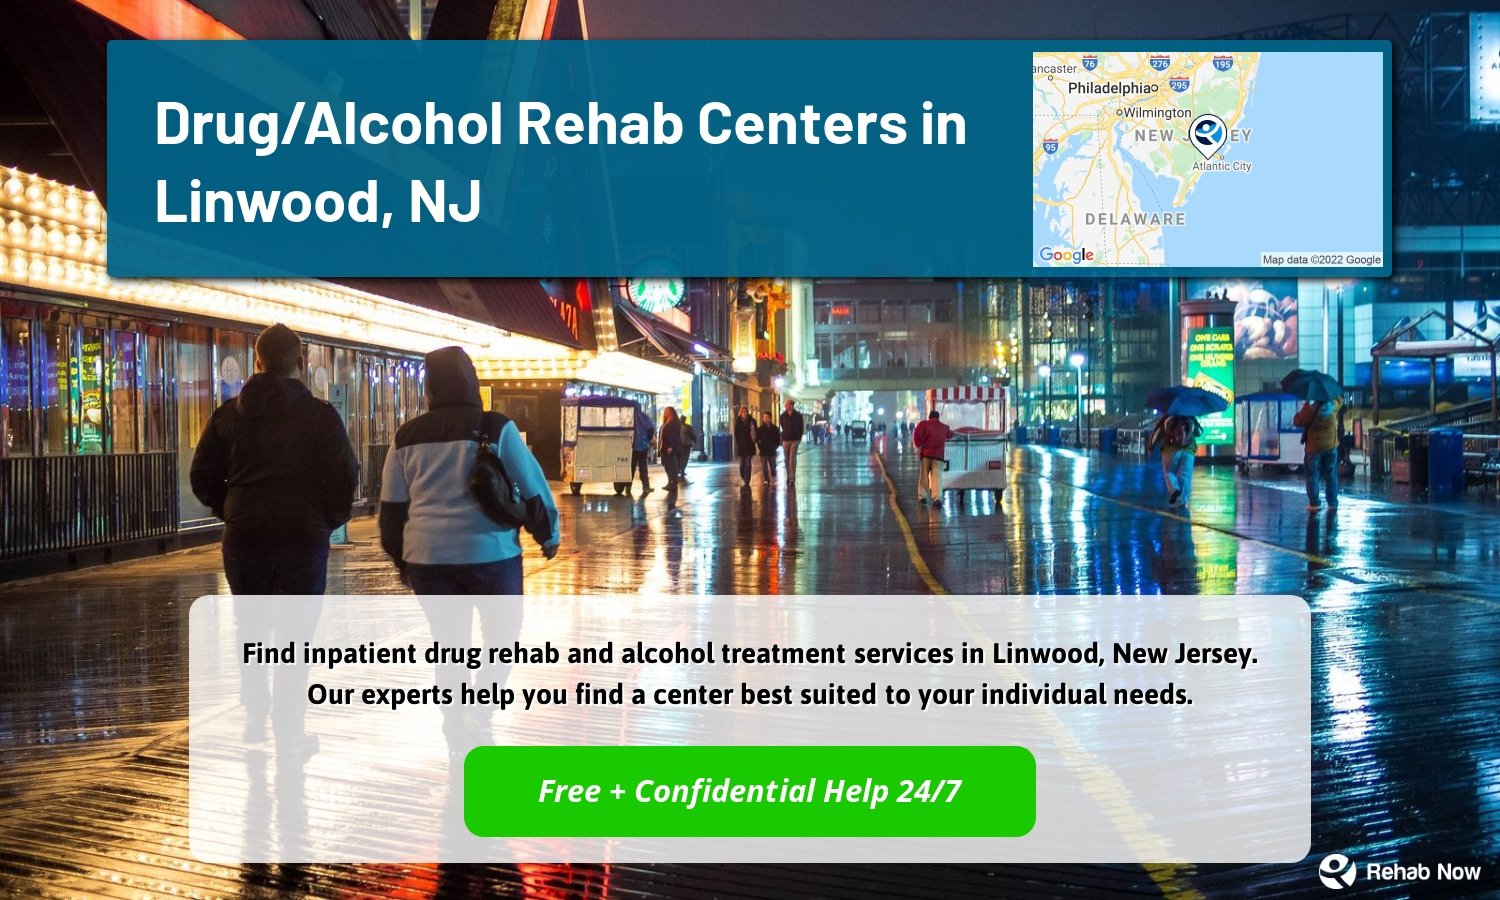 Find inpatient drug rehab and alcohol treatment services in Linwood, New Jersey. Our experts help you find a center best suited to your individual needs.